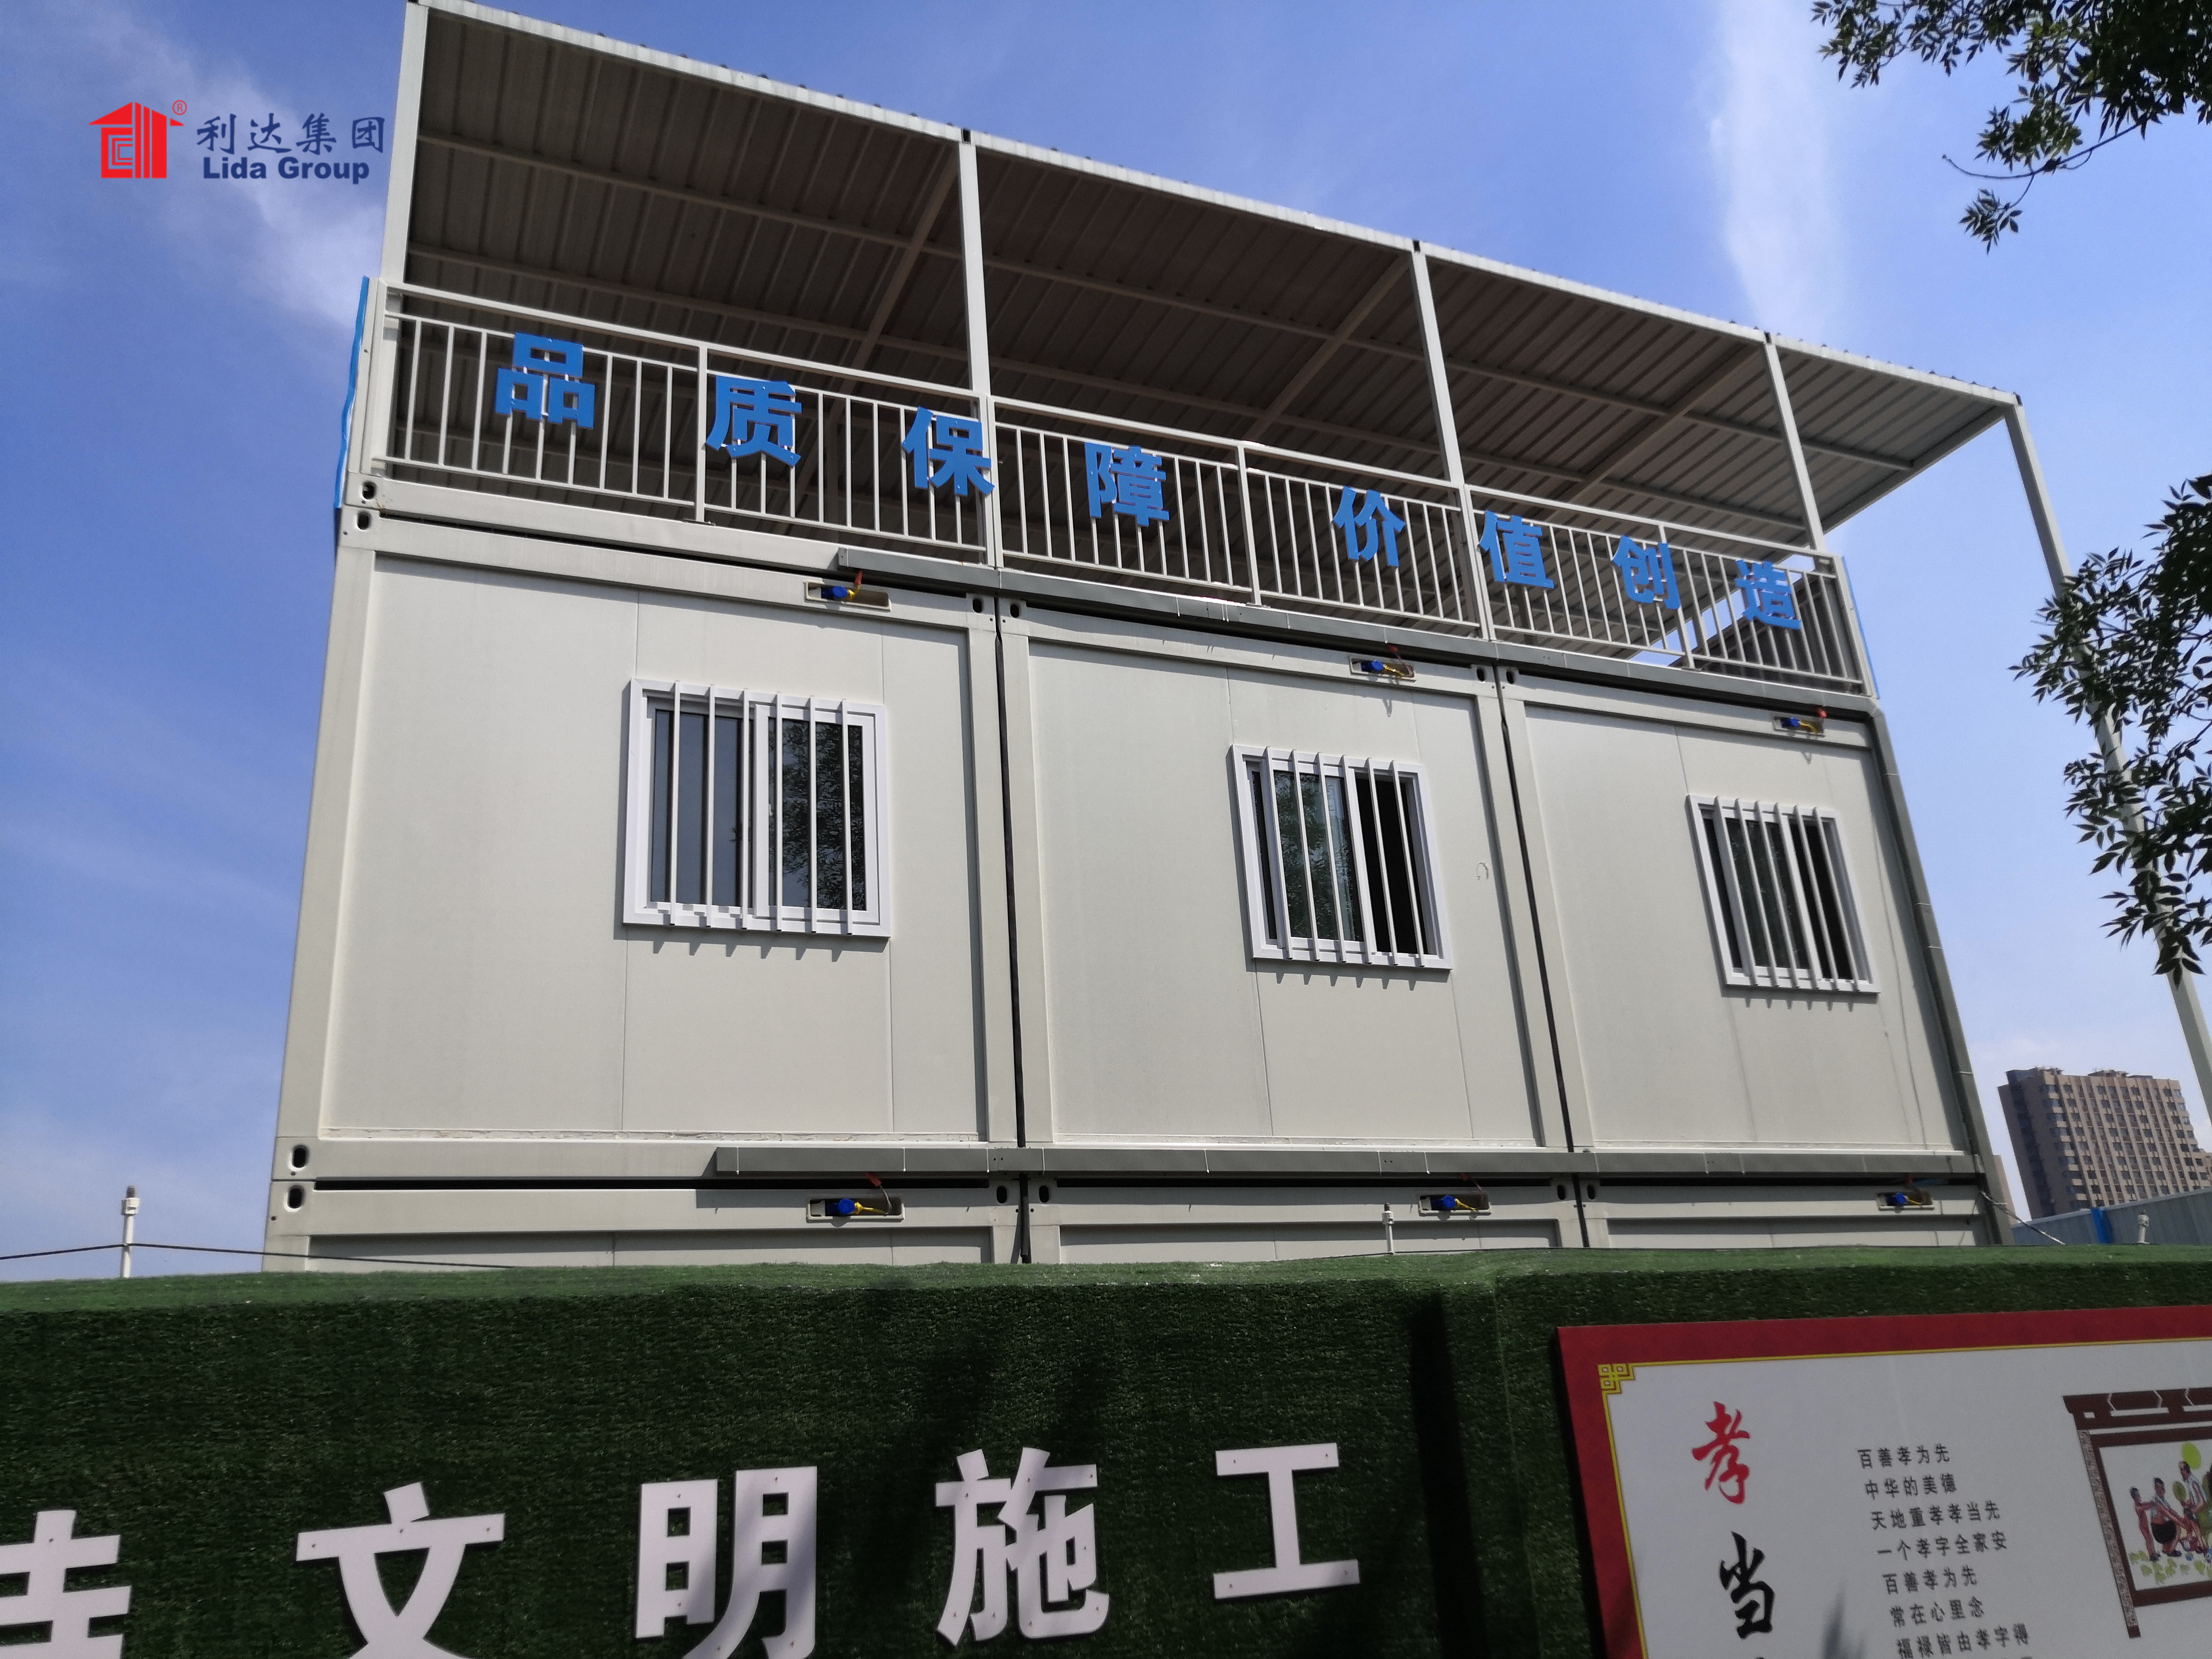 20FT 40ft Easily Assemble Temporary Prefabricated Modular Flat Pack Container Prefab House -Lida Group